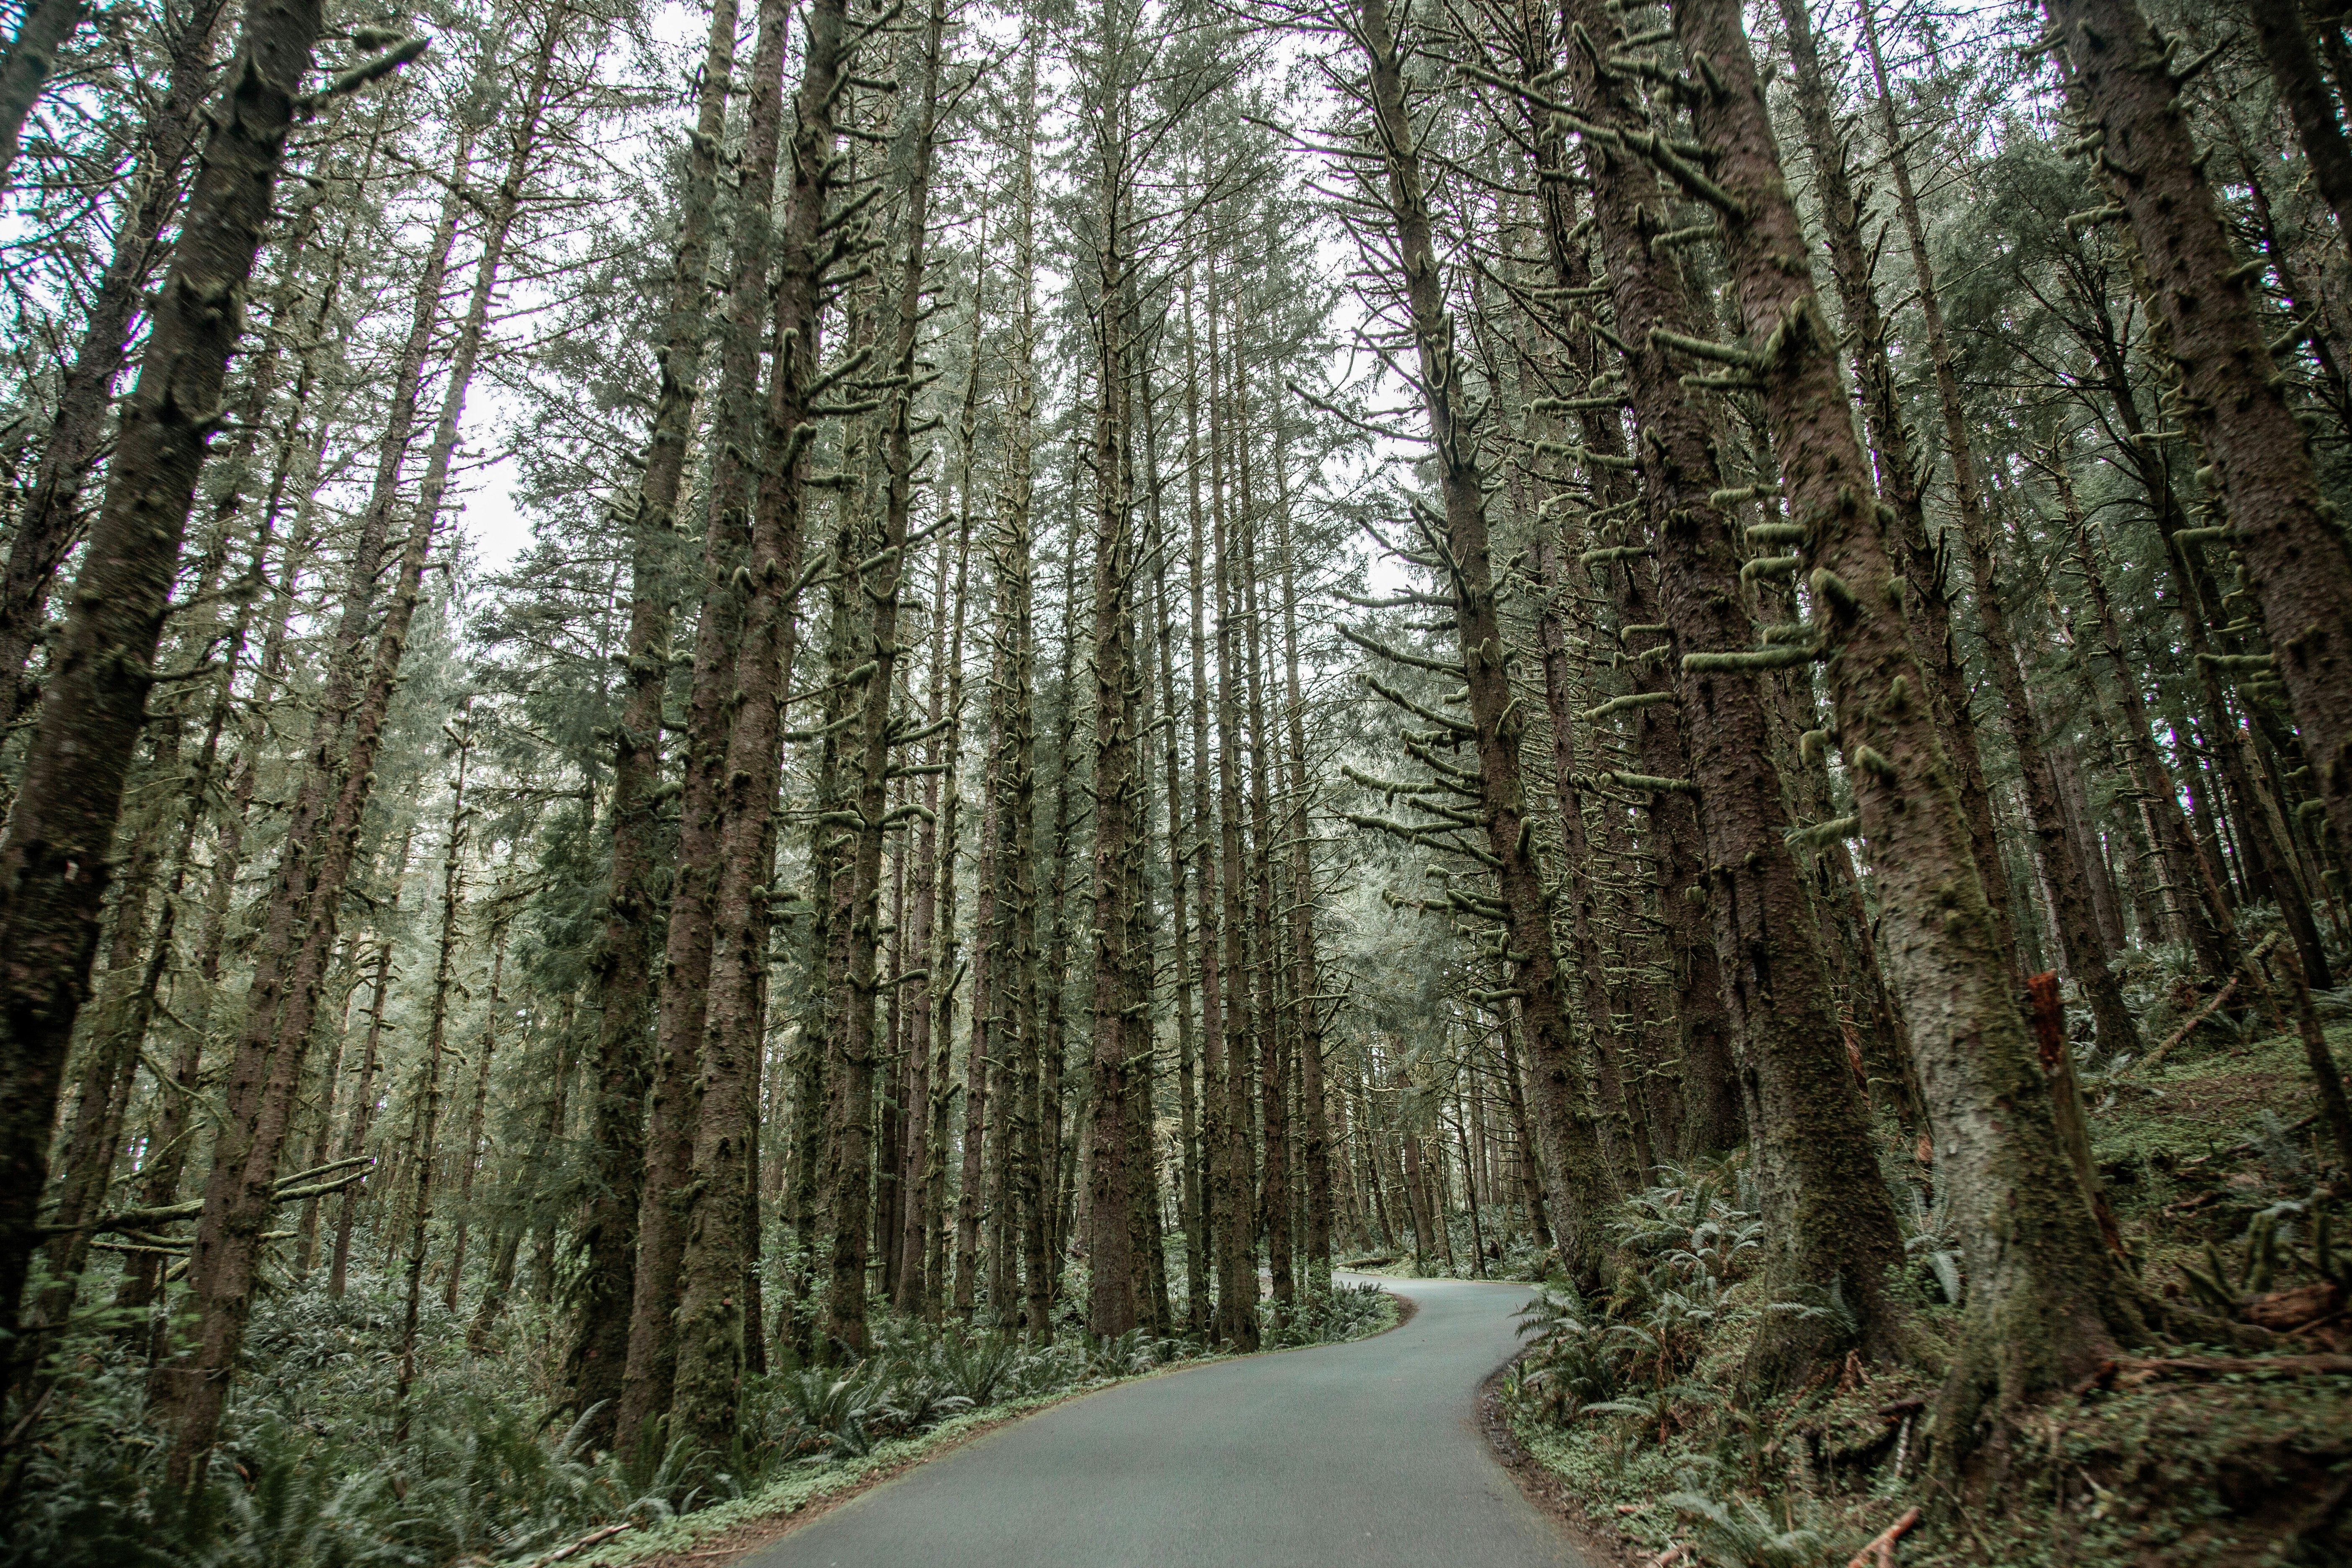 This was taken in the Ecola State Park in Oregon on our way back from Indian Beach.